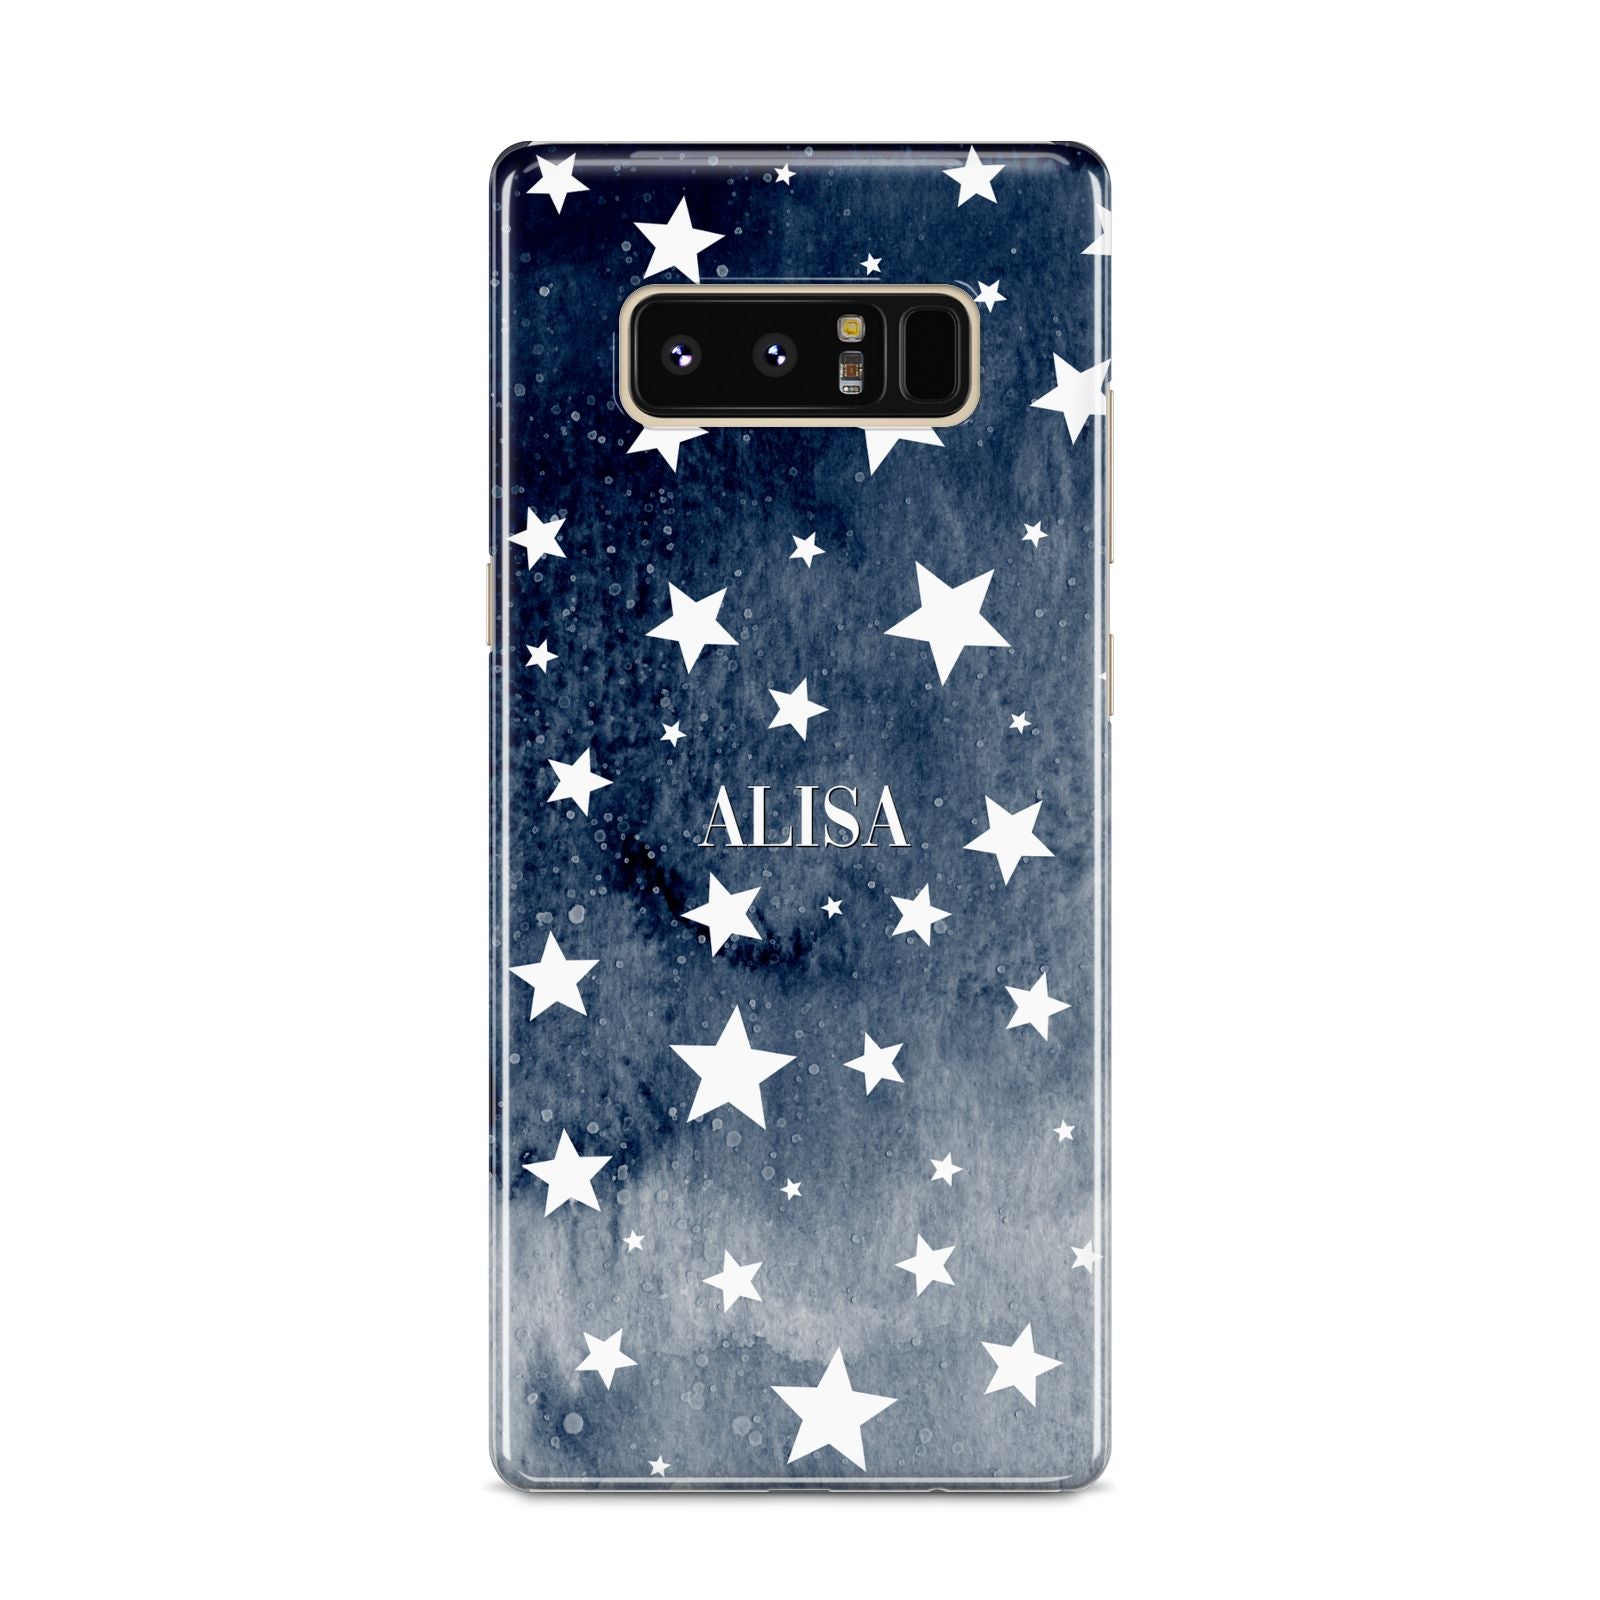 Personalised Star Print Samsung Galaxy S8 Case